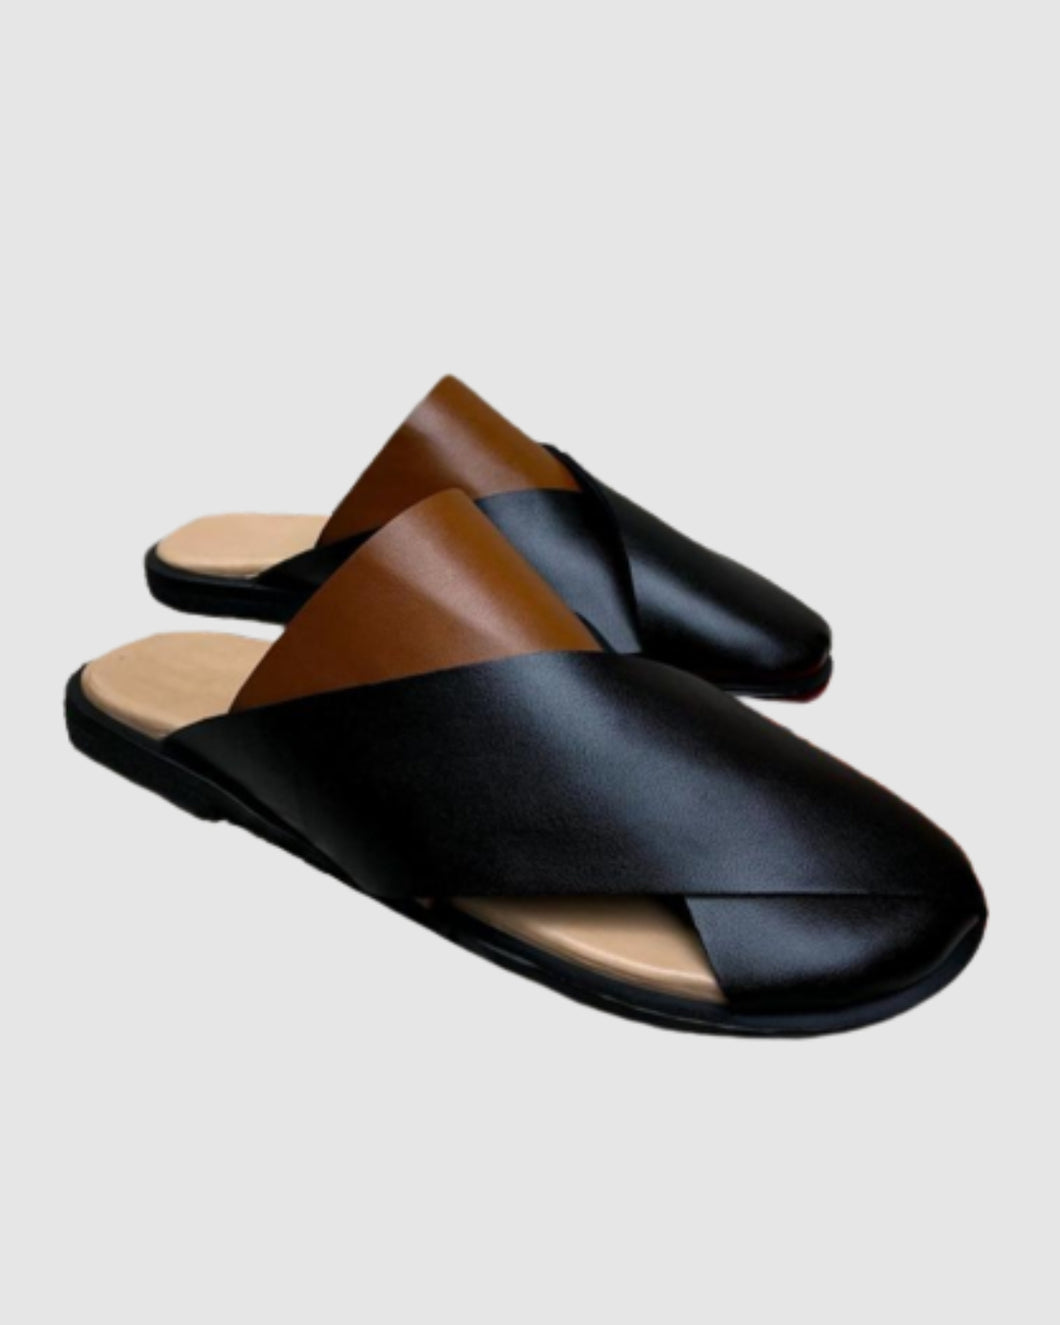 Governors Cover Mule Slippers | Black and Brown